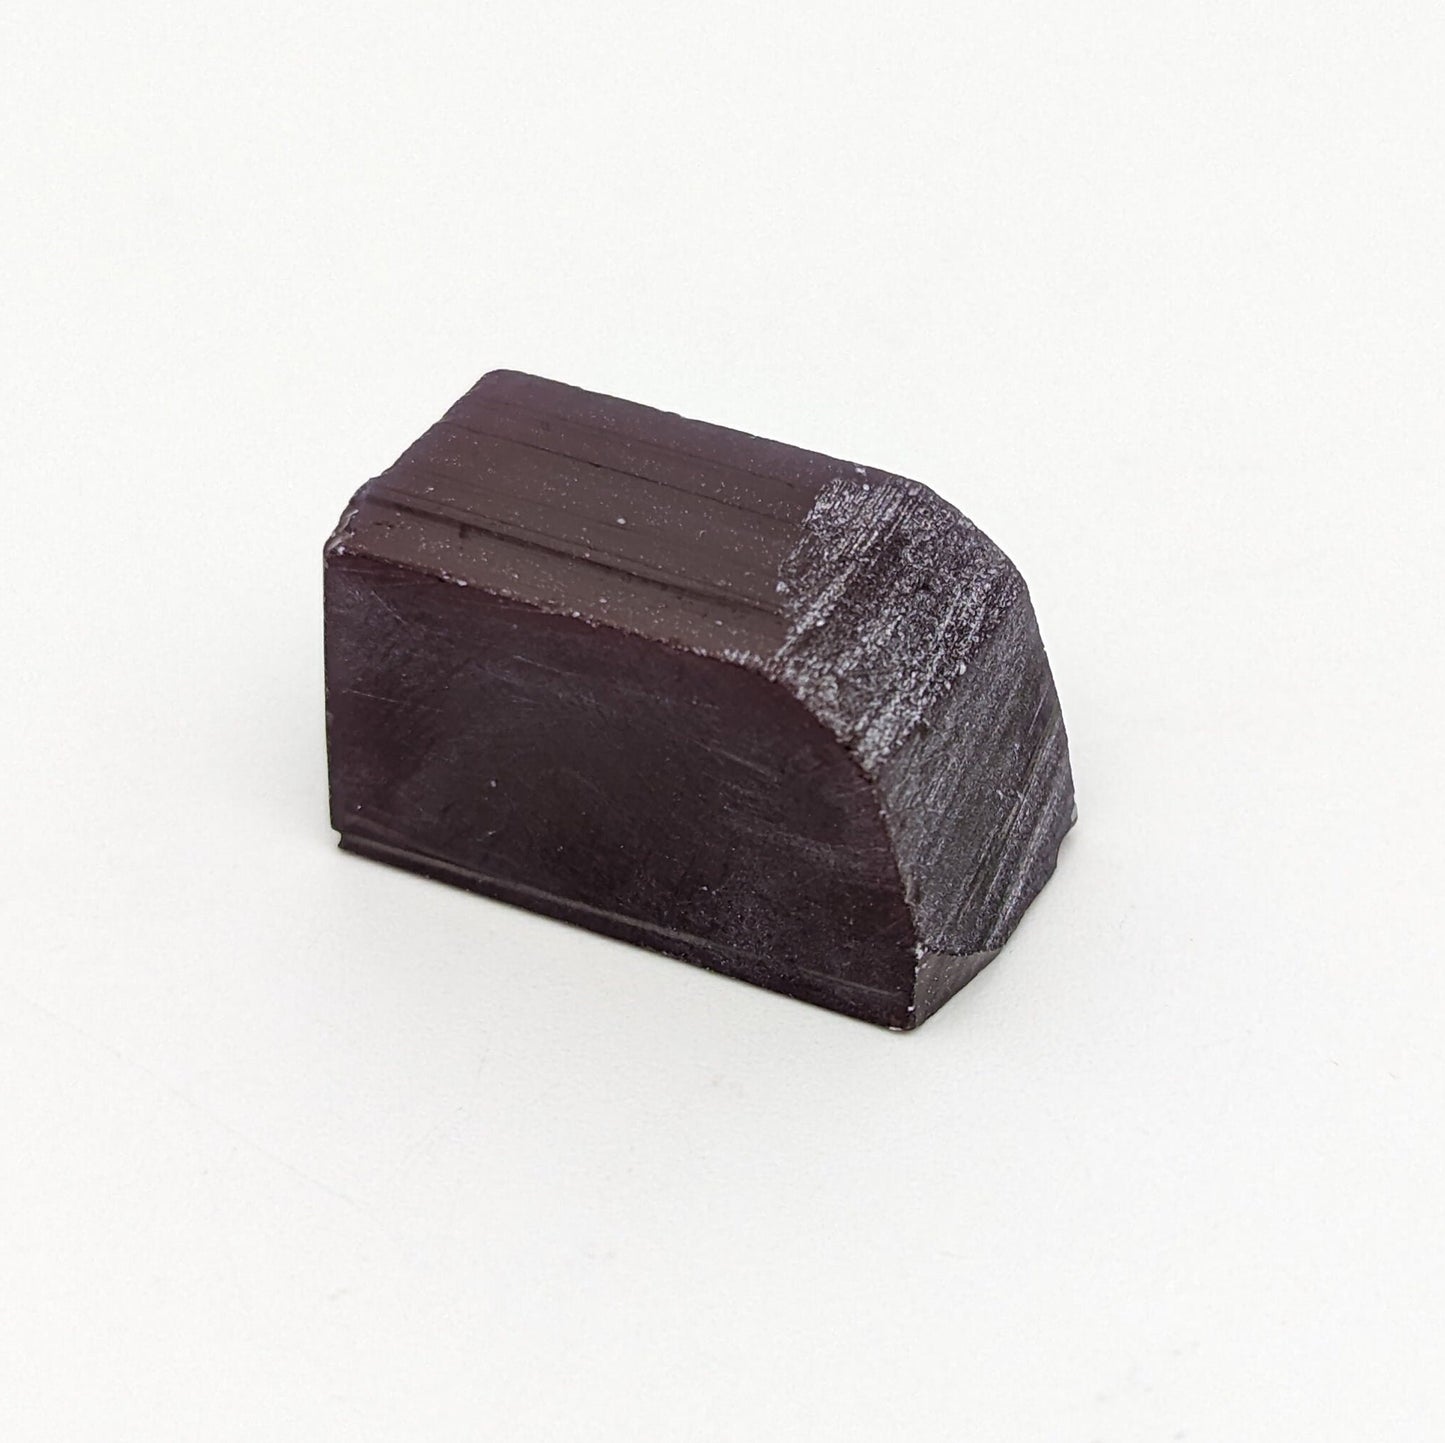 Synthetic Pulled Alexandrite - 69.5 Carats - Grade A - Faceting Rough for Gem Cutting